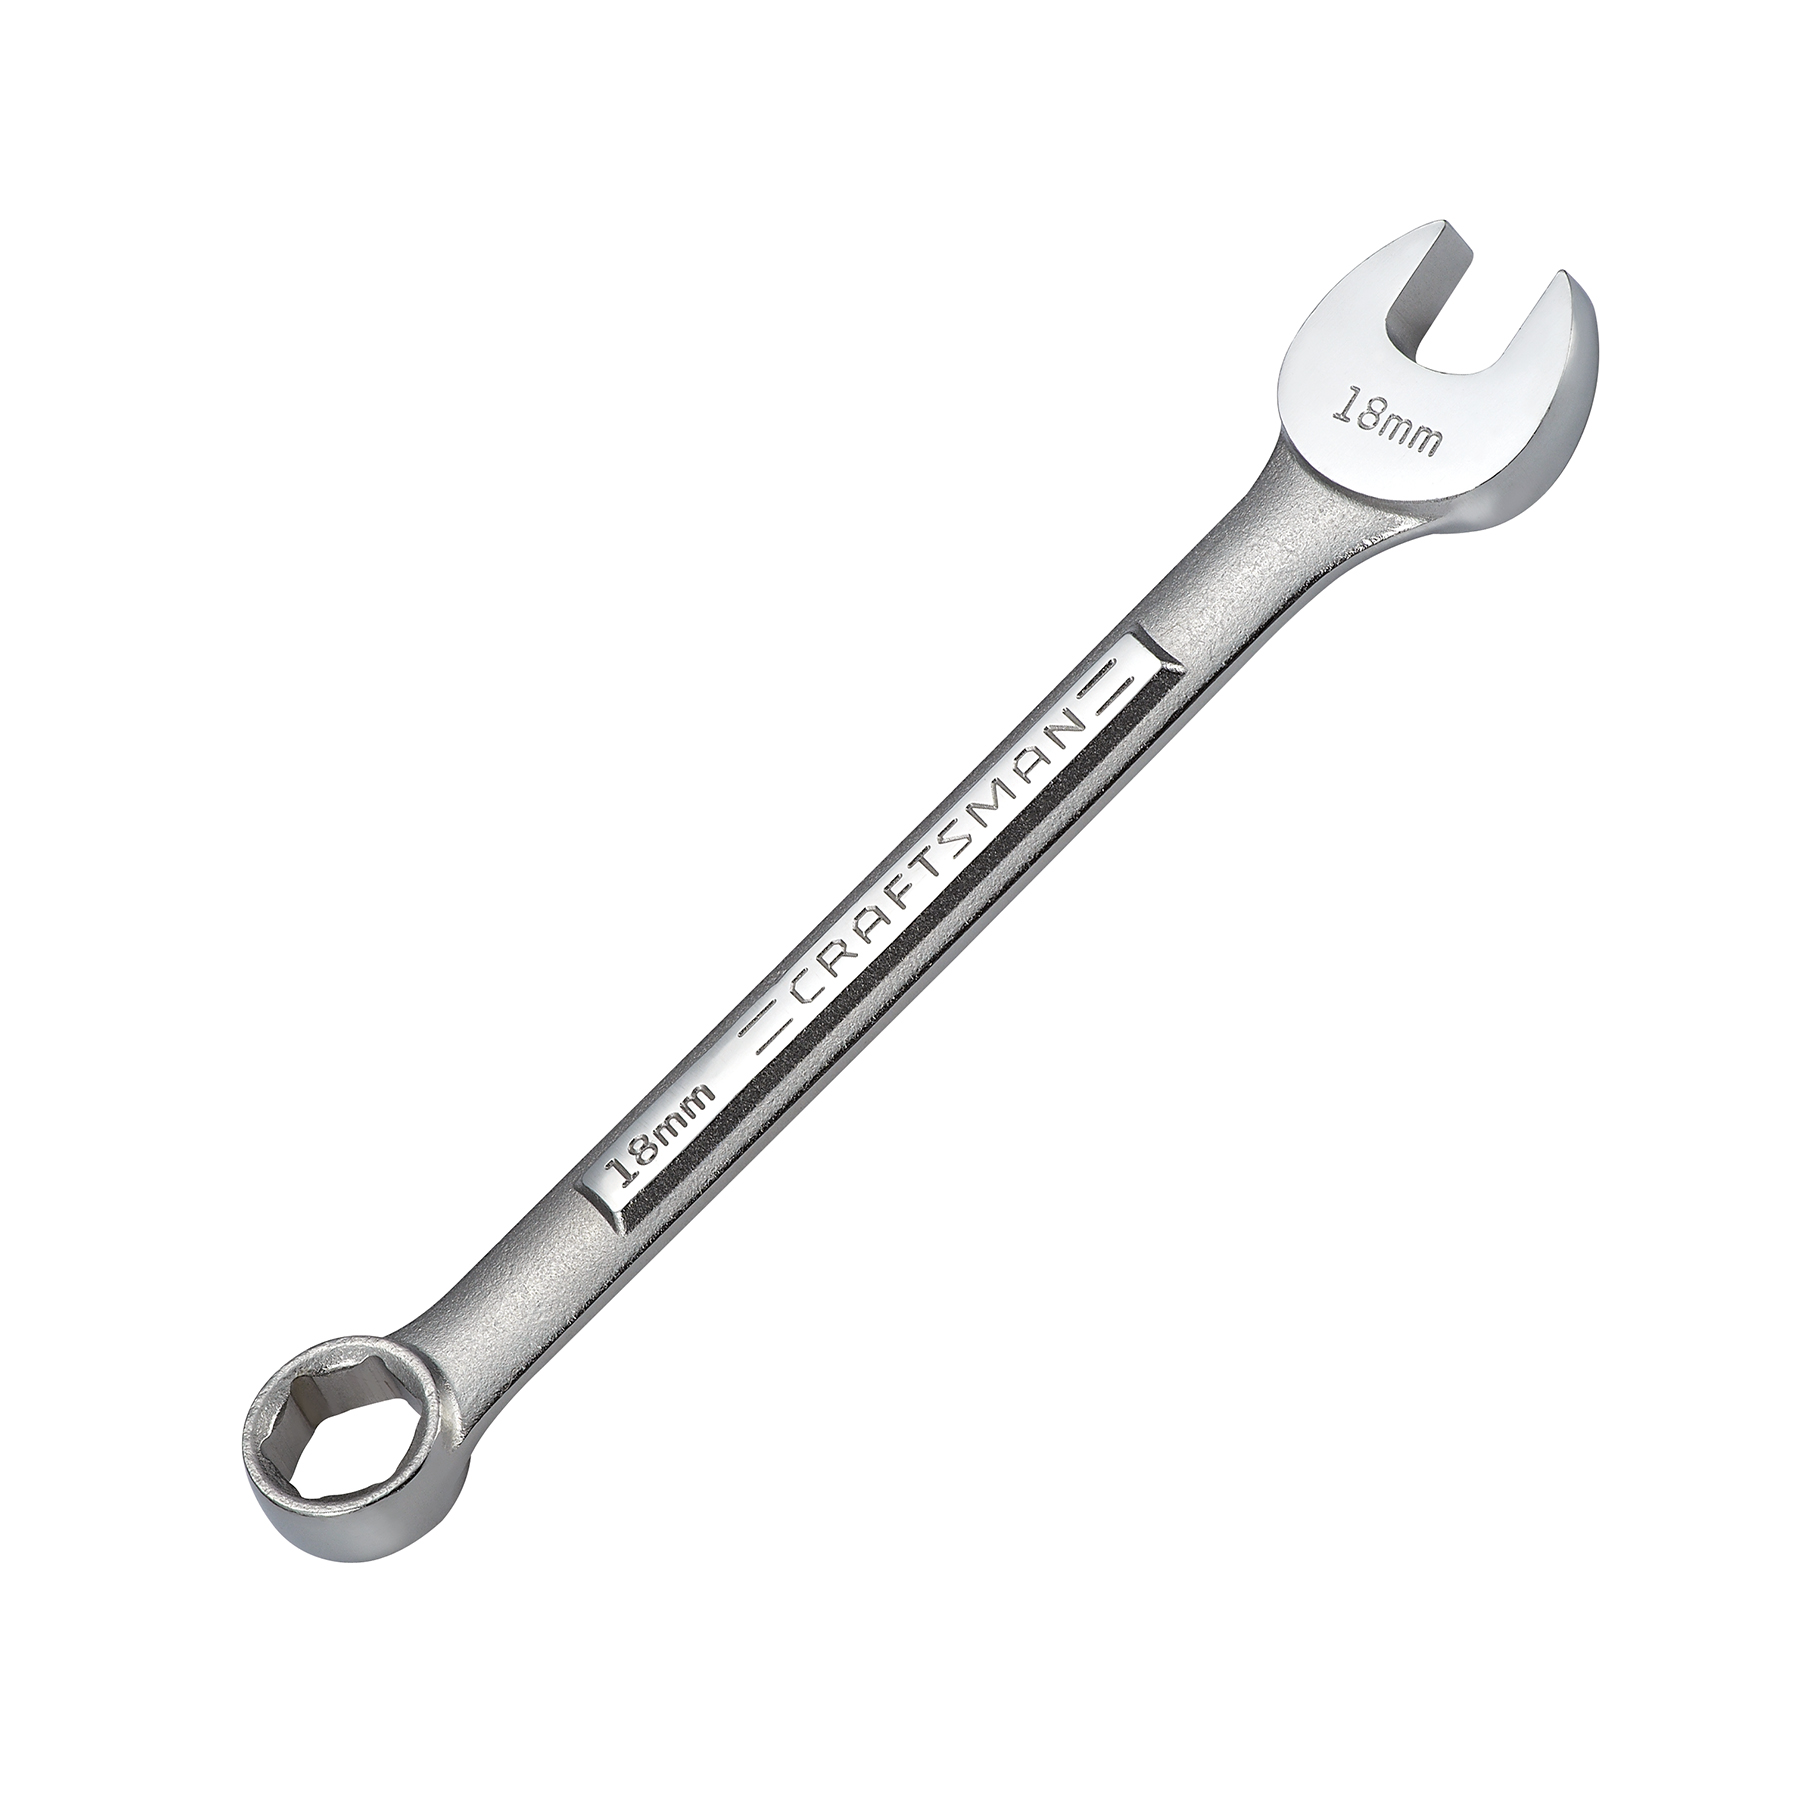 Craftsman 18mm 6-Point Combination Wrench